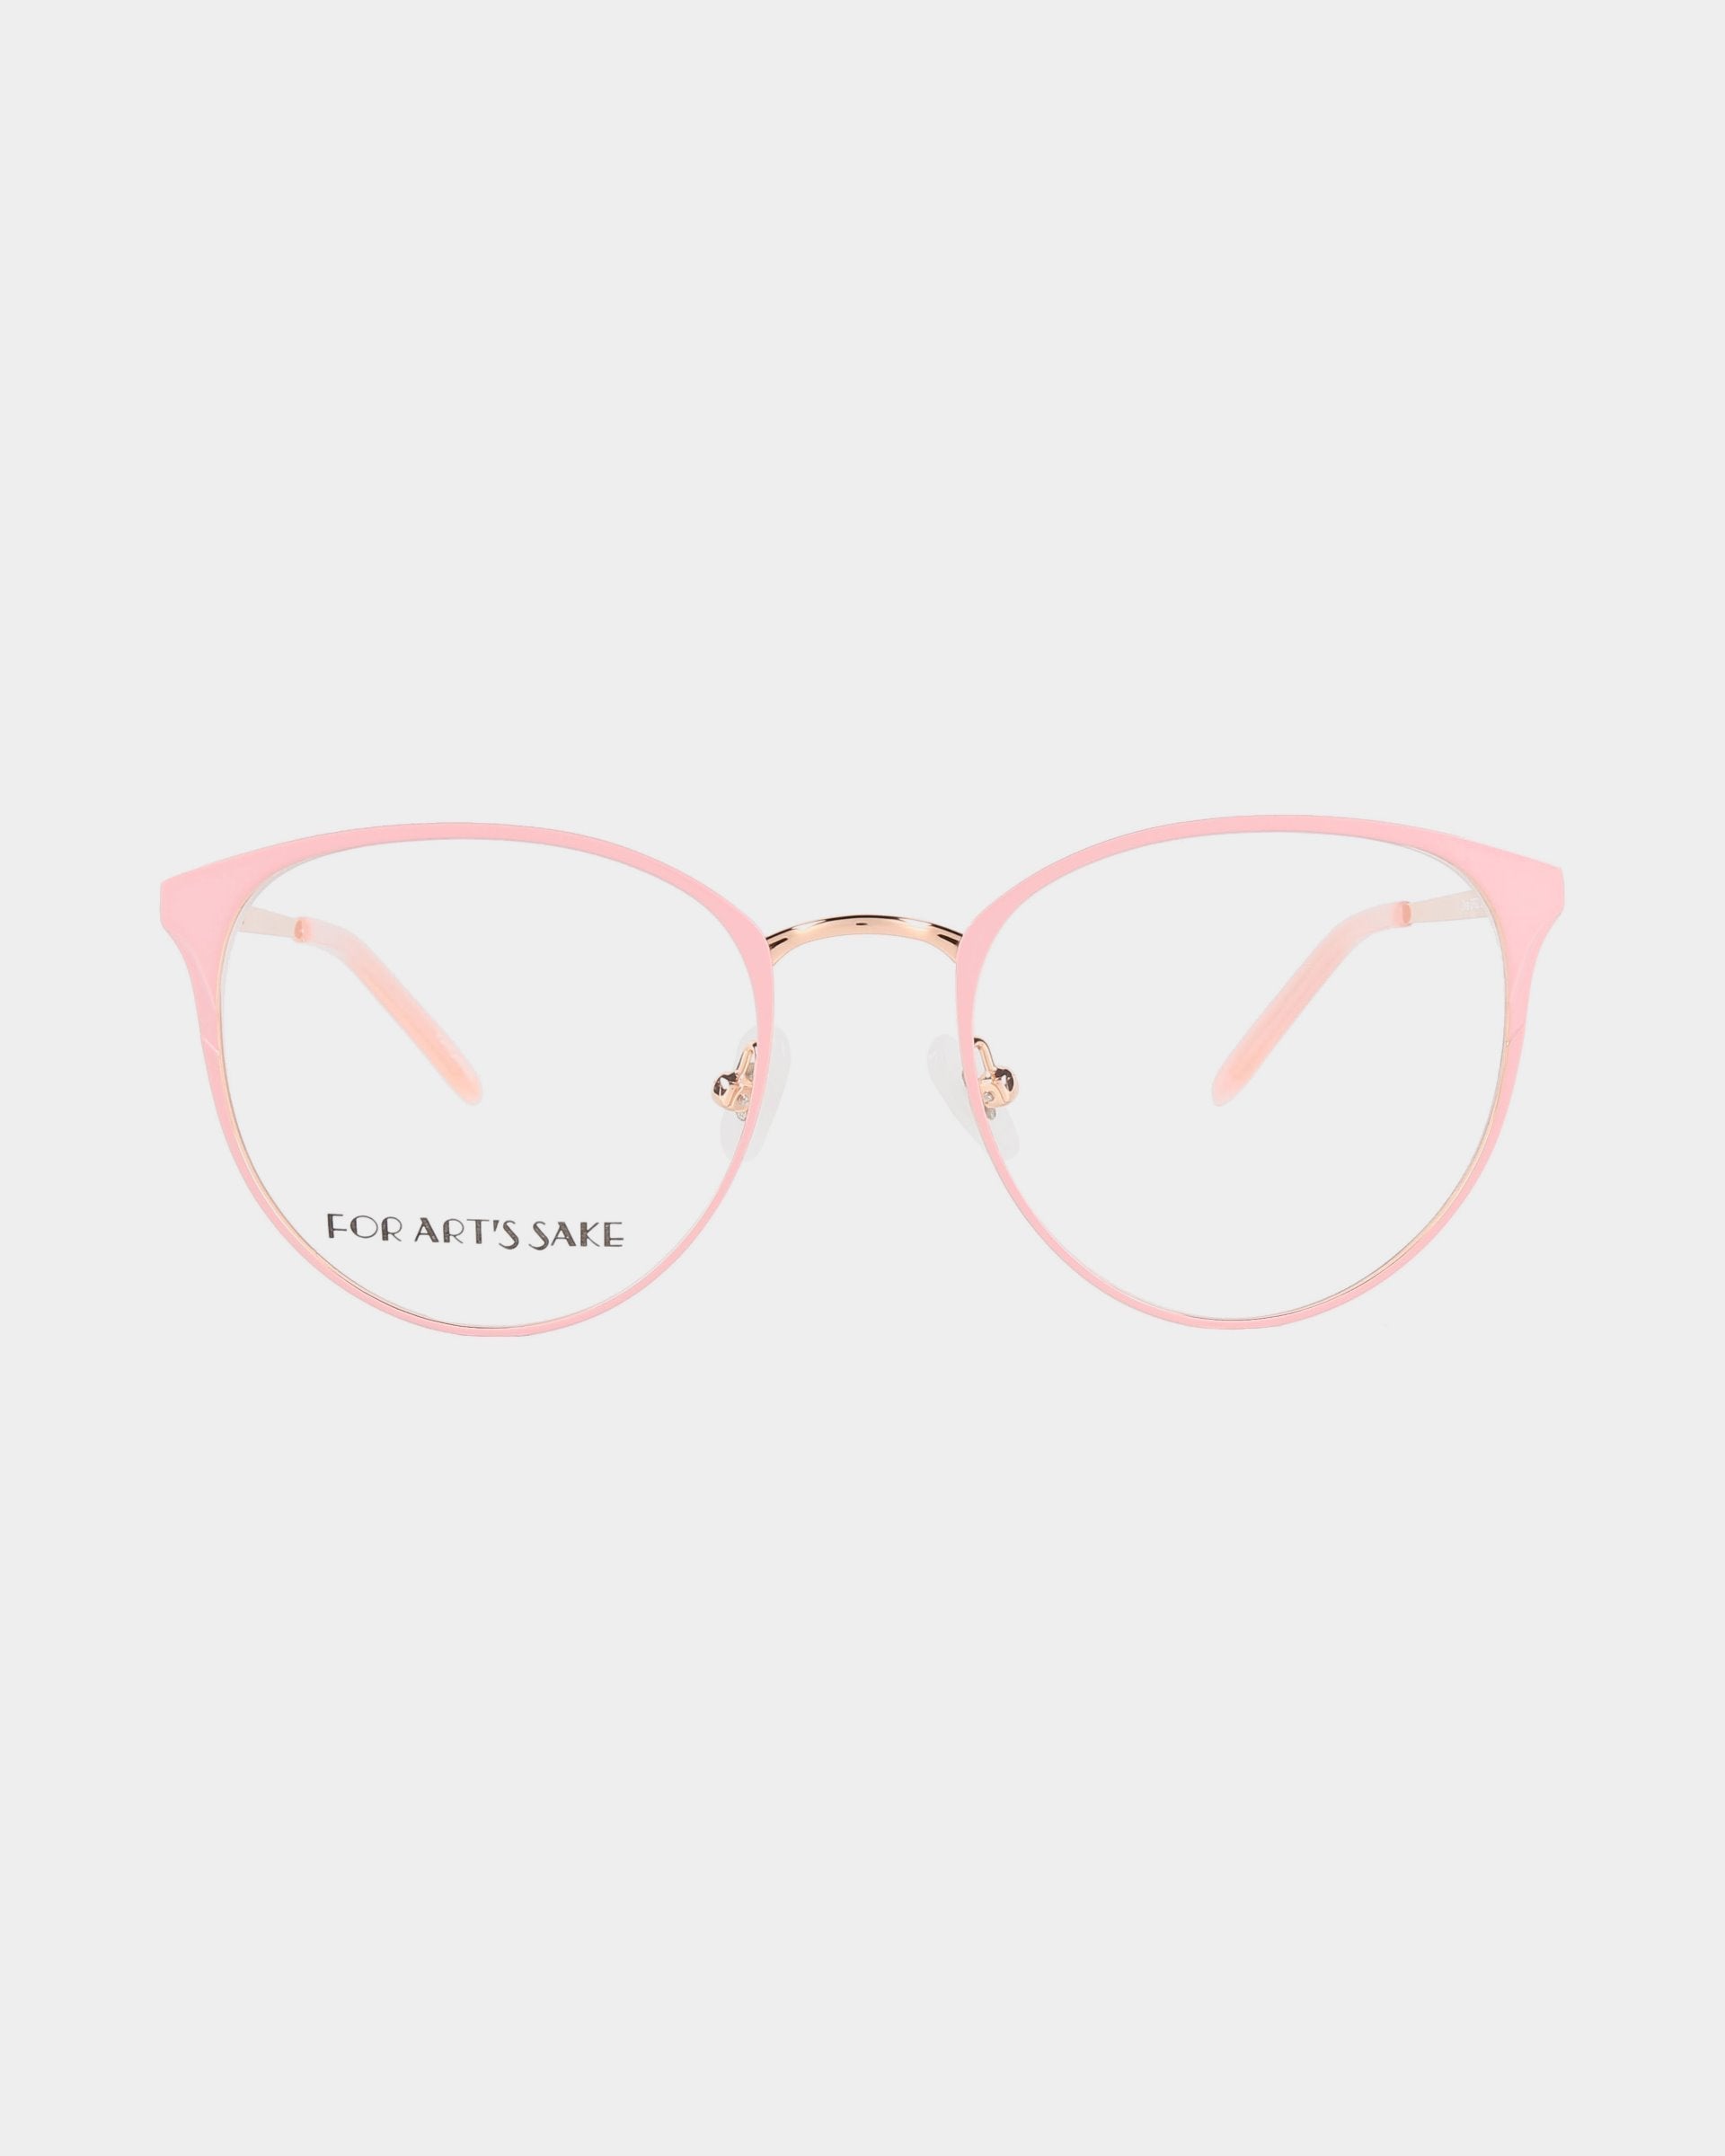 A pair of eyeglasses with round, pink-colored frames and clear lenses featuring UV Protection Lenses against a white background. The brand name "For Art's Sake®" is printed on the left lens in black. The glasses, named Olivia, have nose pads and a sleek, modern design.